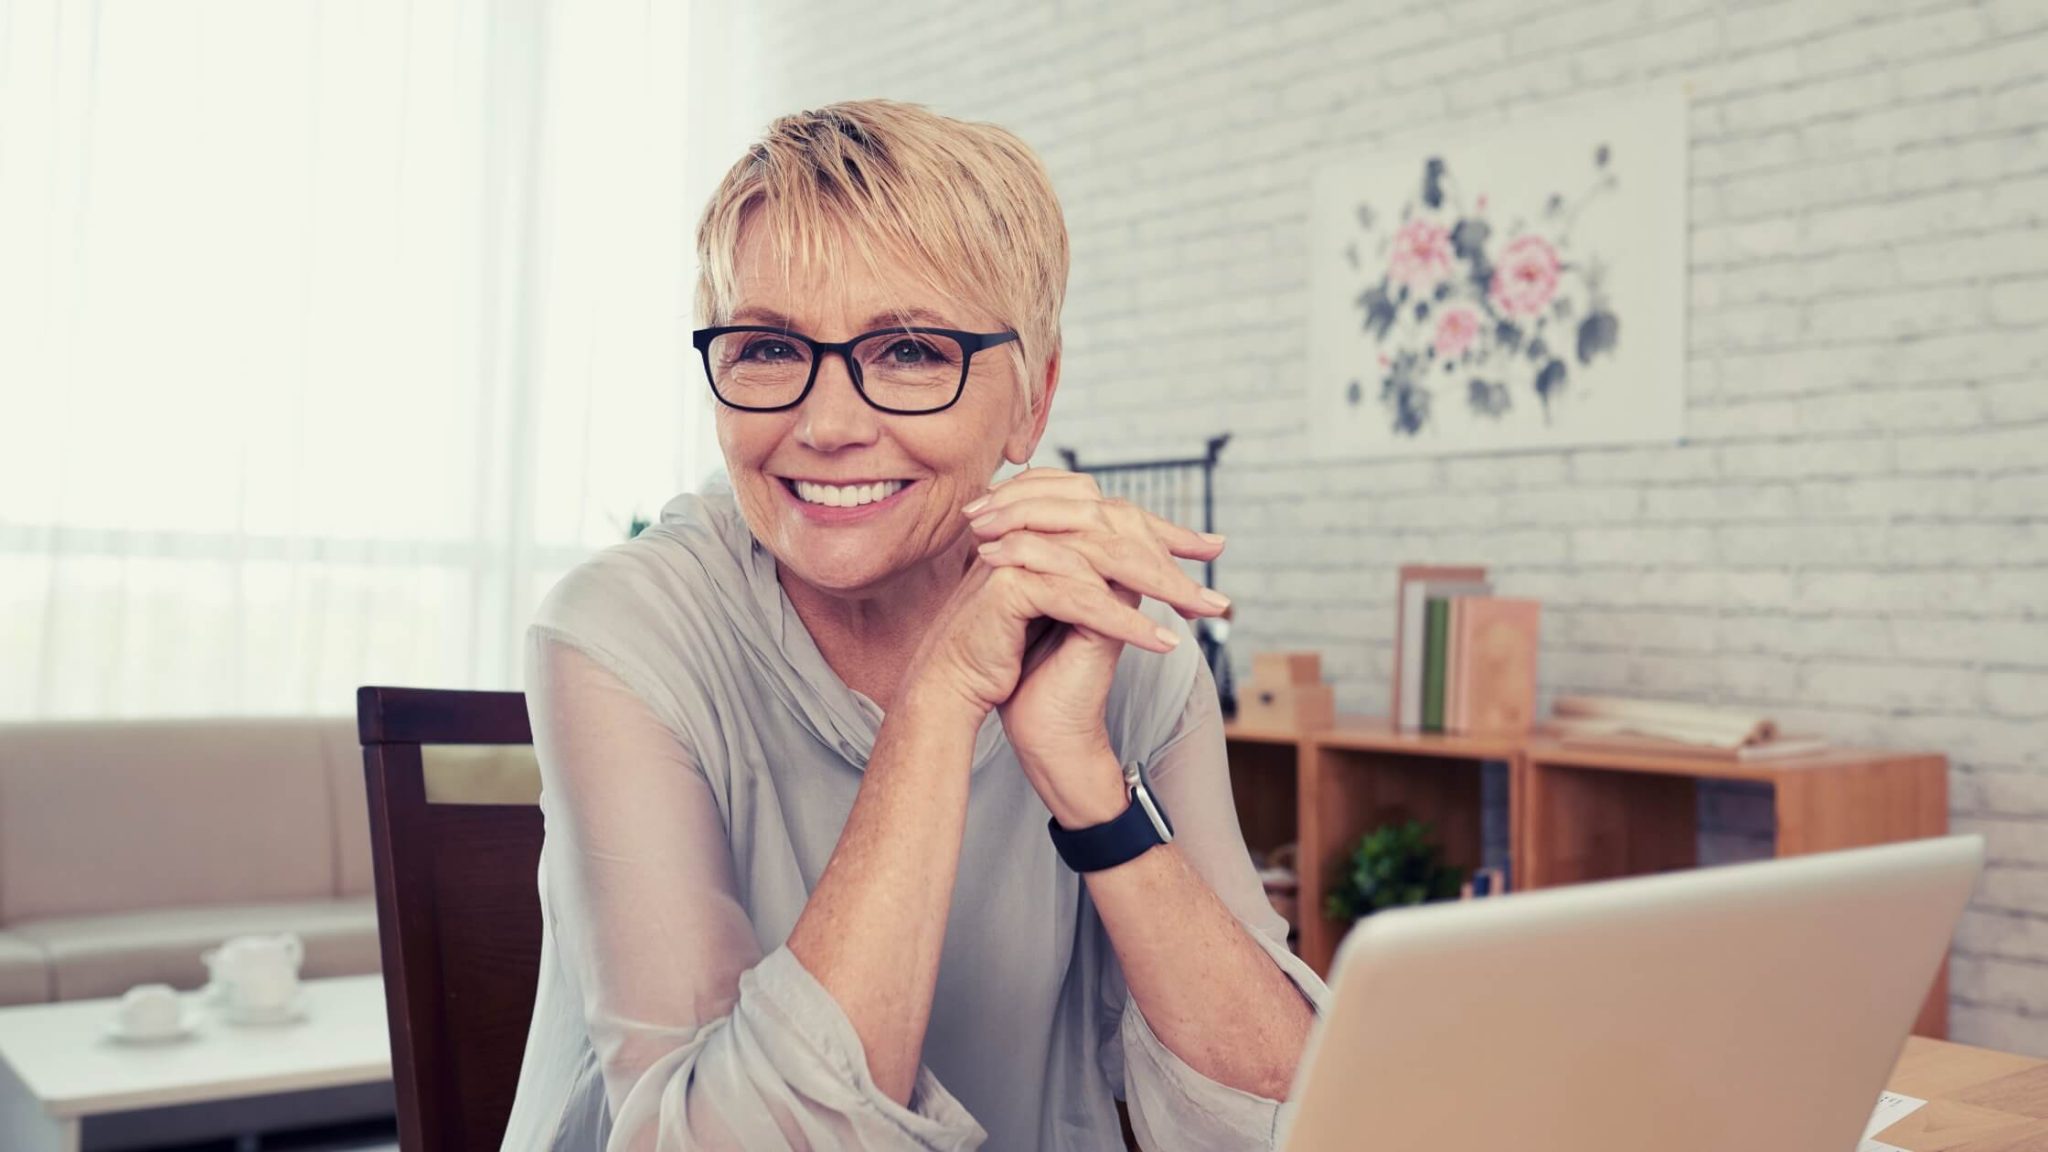 blonde woman with glasses, short hair, smiling, in front of her laptop, over 40 years old.